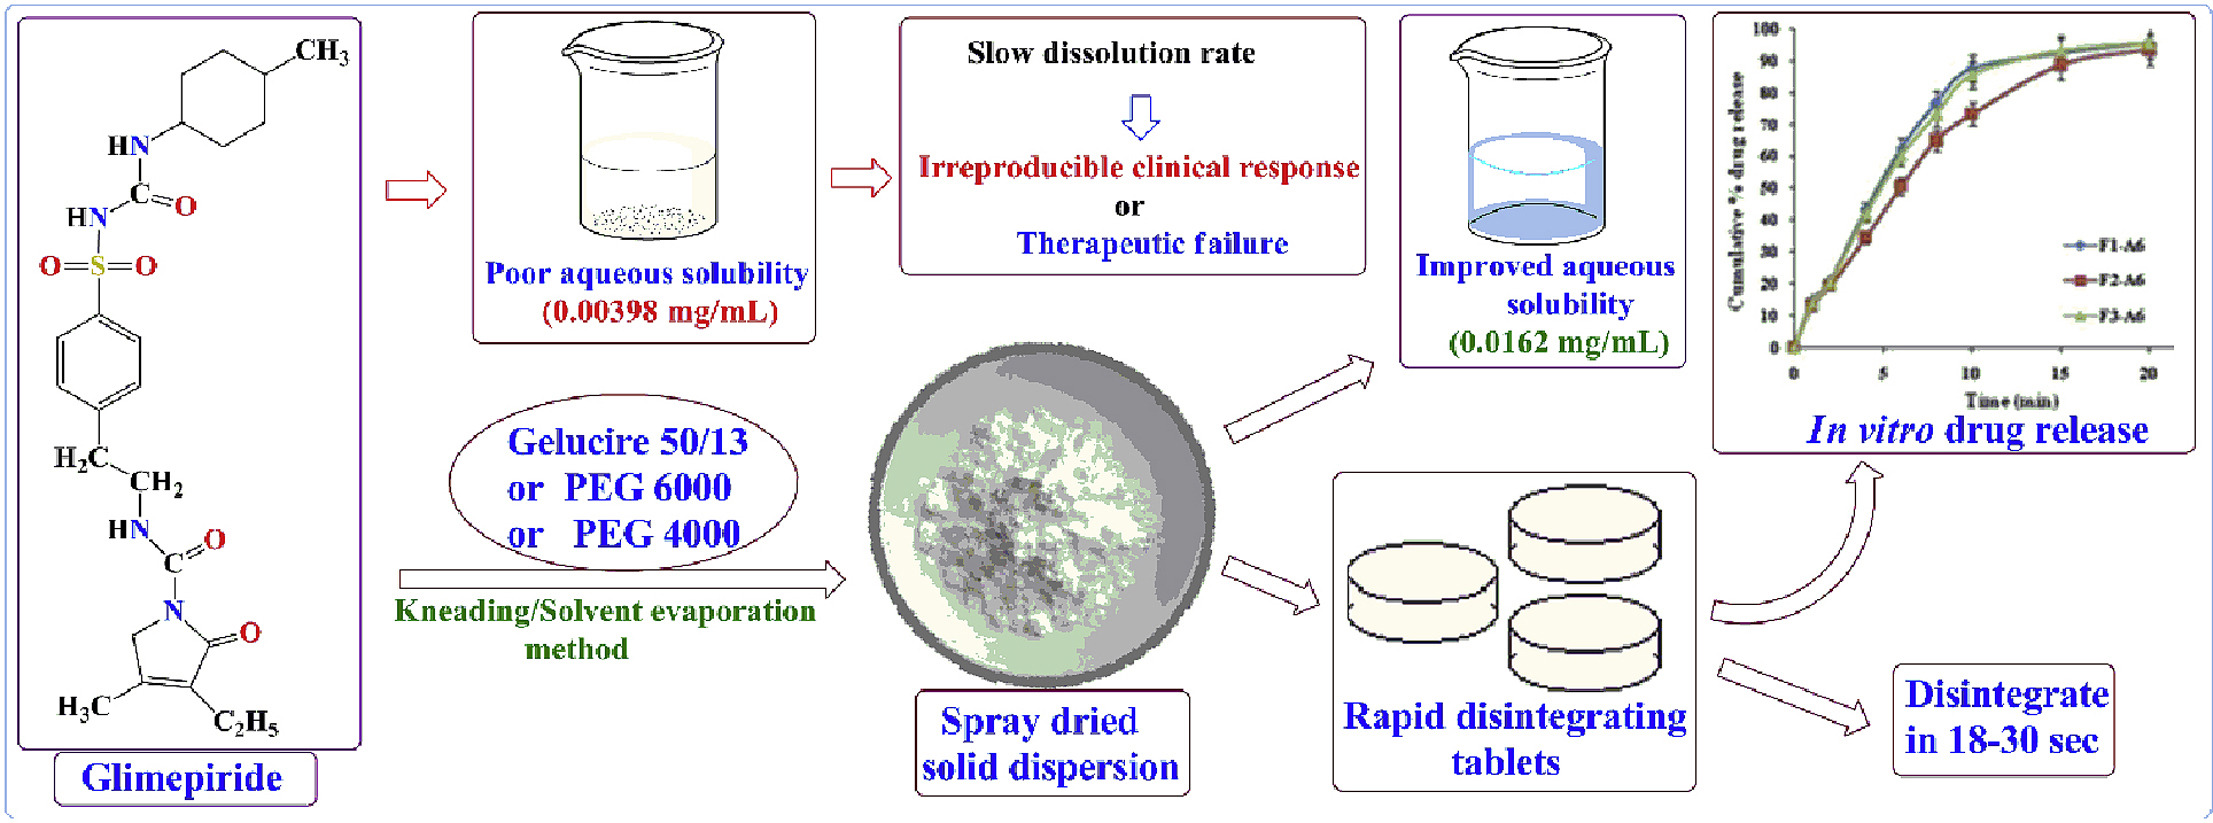 Development And Evaluation Of Solid Dispersion Based Rapid Disintegrating Tablets Of Poorly Water Soluble Anti Diabetic Drug Pharma Excipients